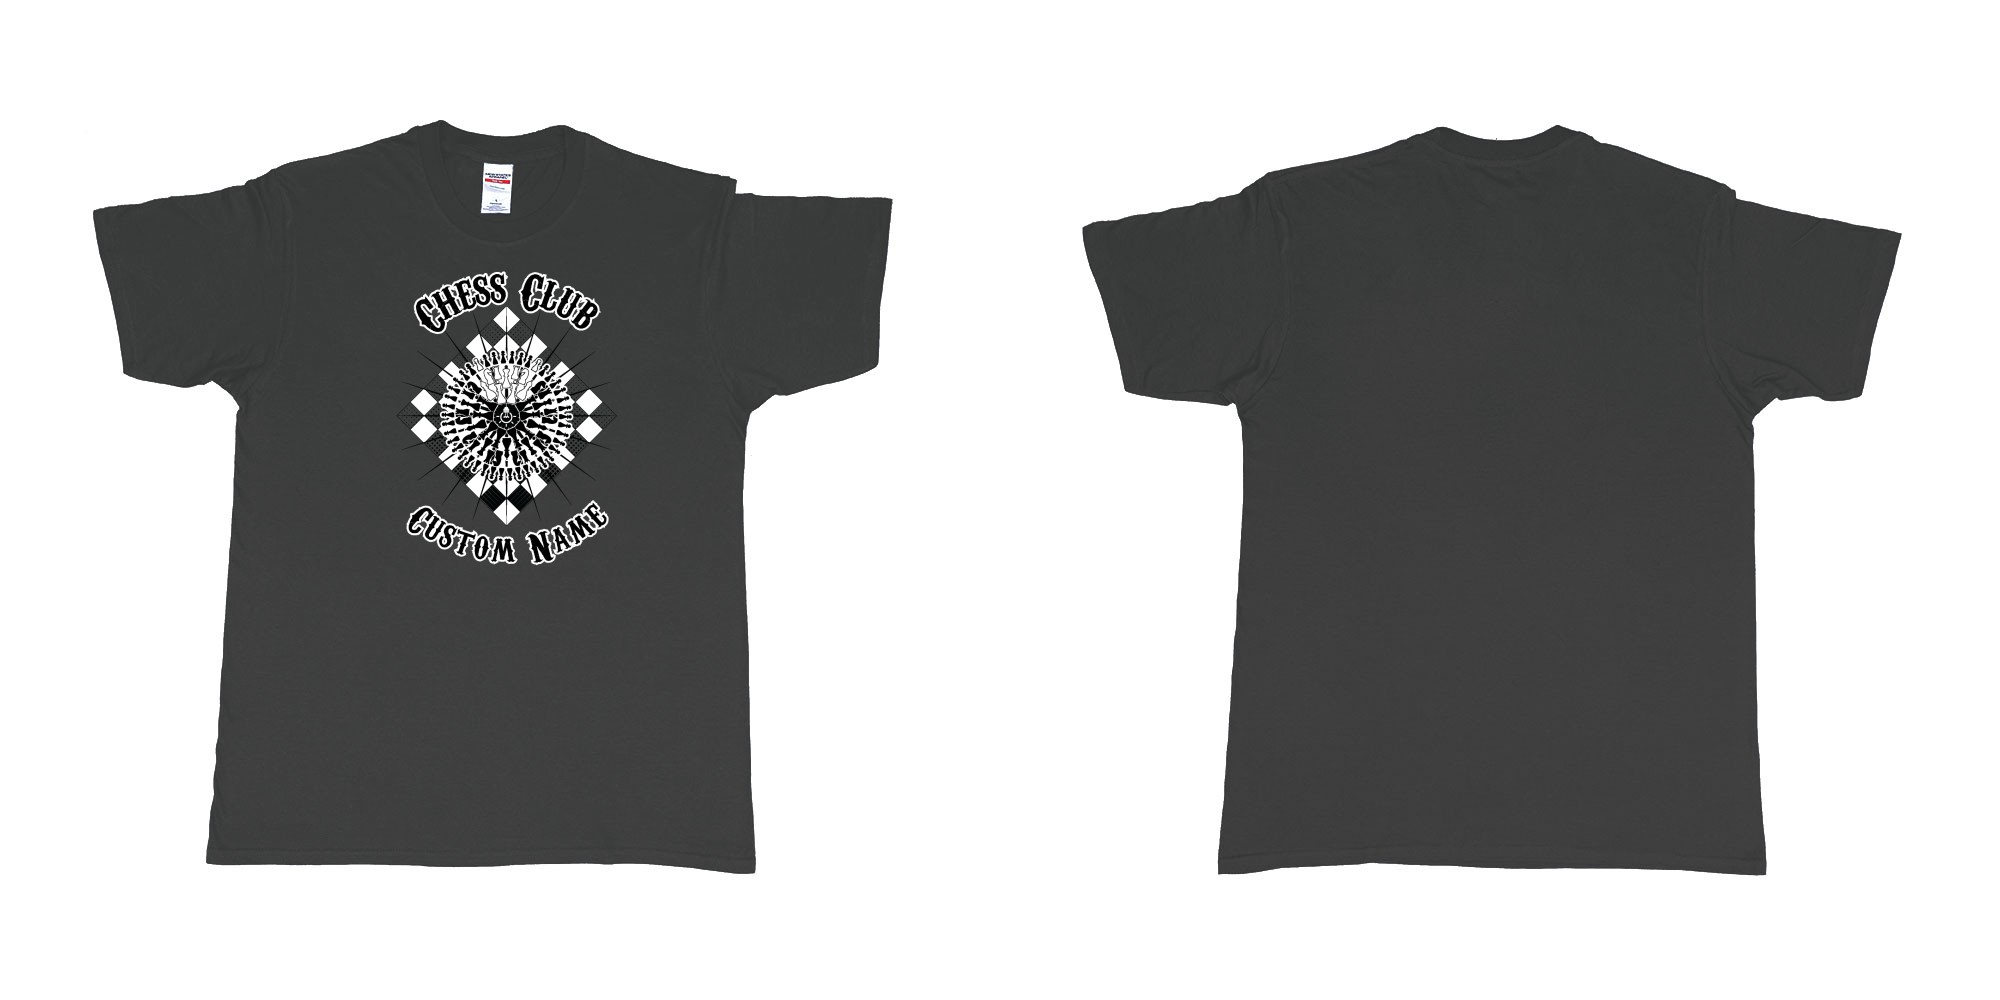 Custom tshirt design chess club mandala in fabric color black choice your own text made in Bali by The Pirate Way